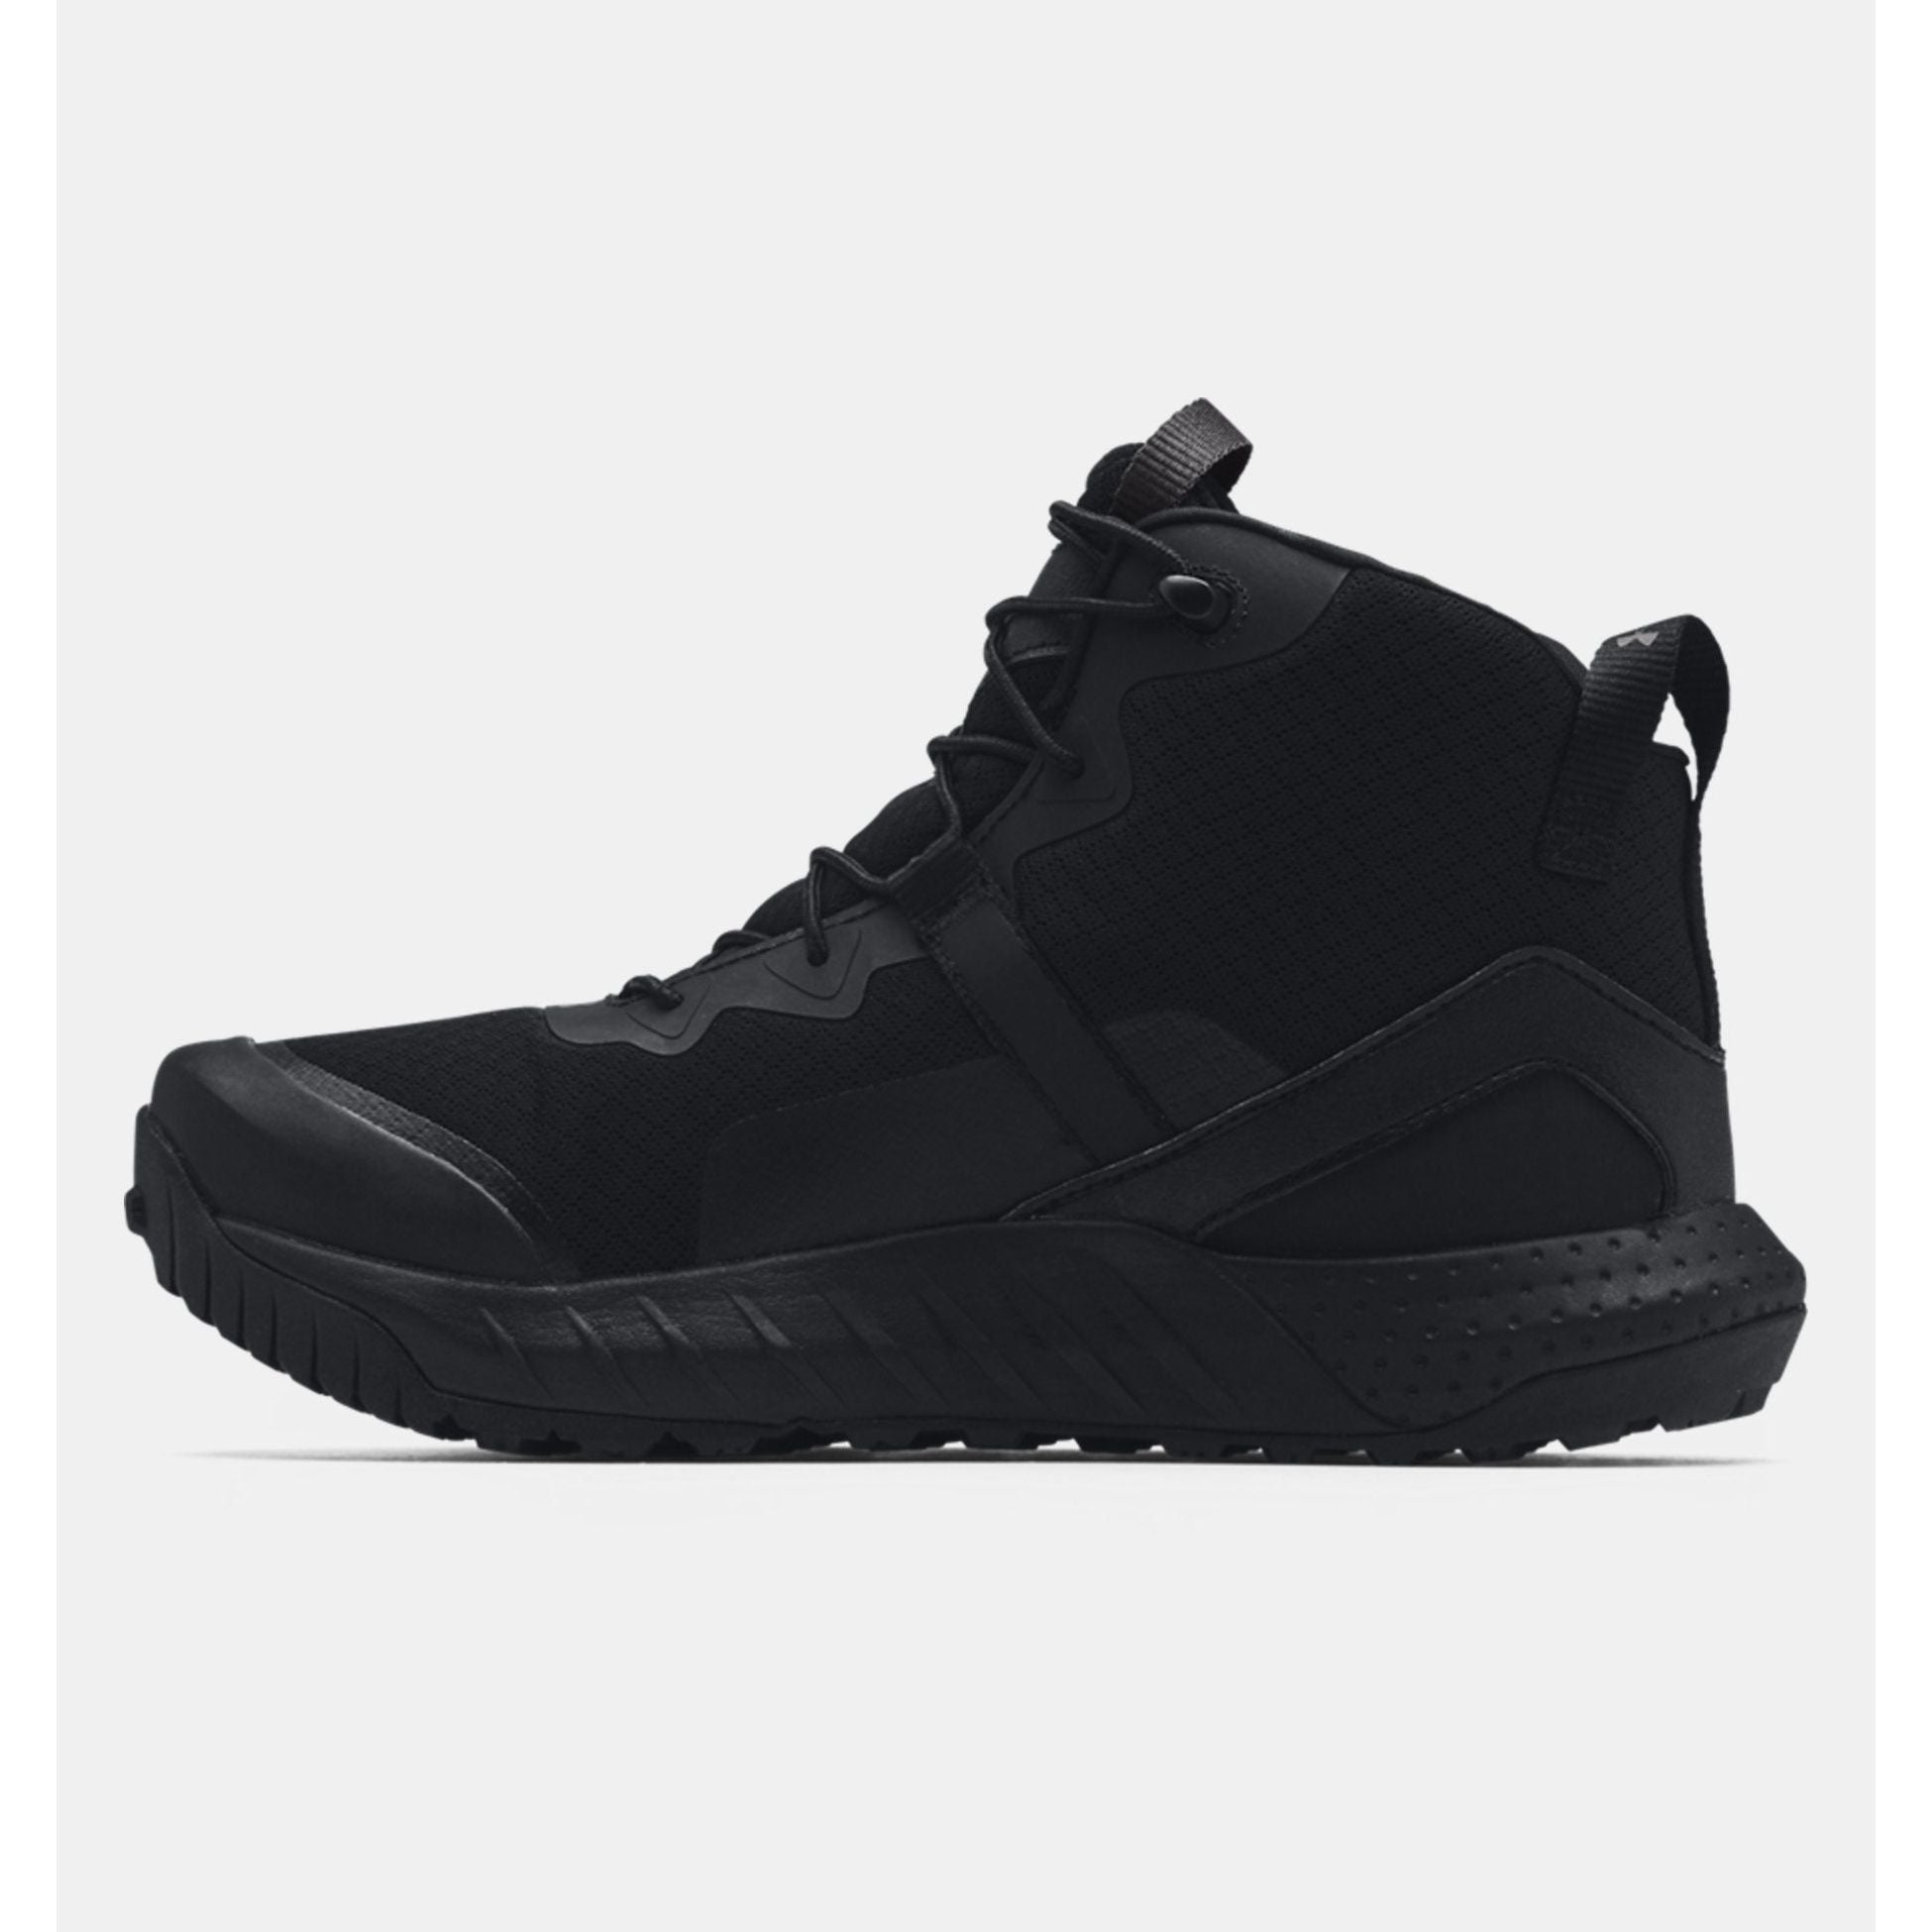 Under Armour Micro G® Valsetz Mid Tactical Boots Black - FULLSEND SKI AND OUTDOOR